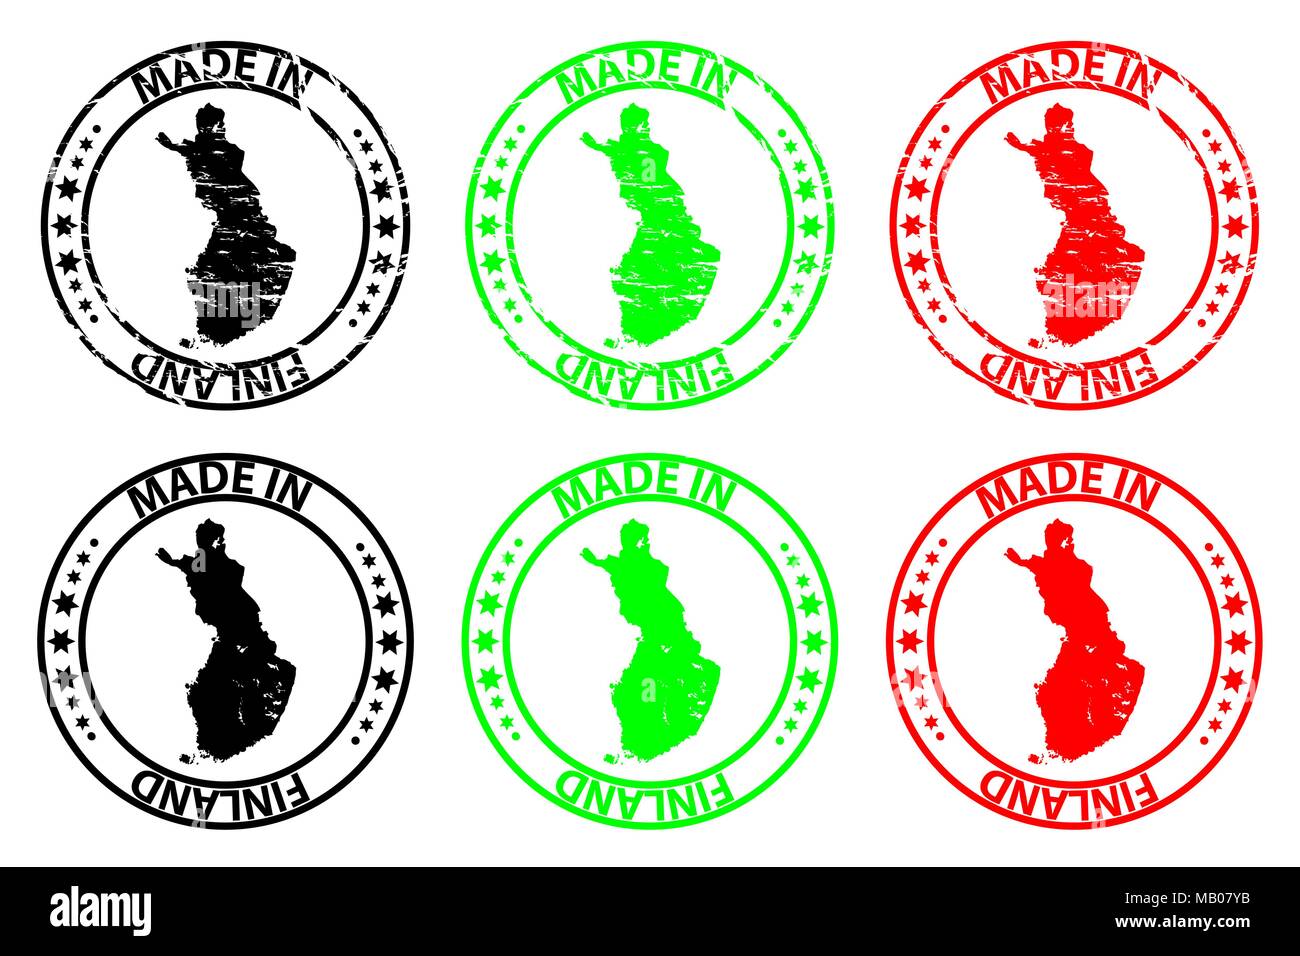 Made in Finland - rubber stamp - vector, Finland map pattern - black, green and red Stock Vector